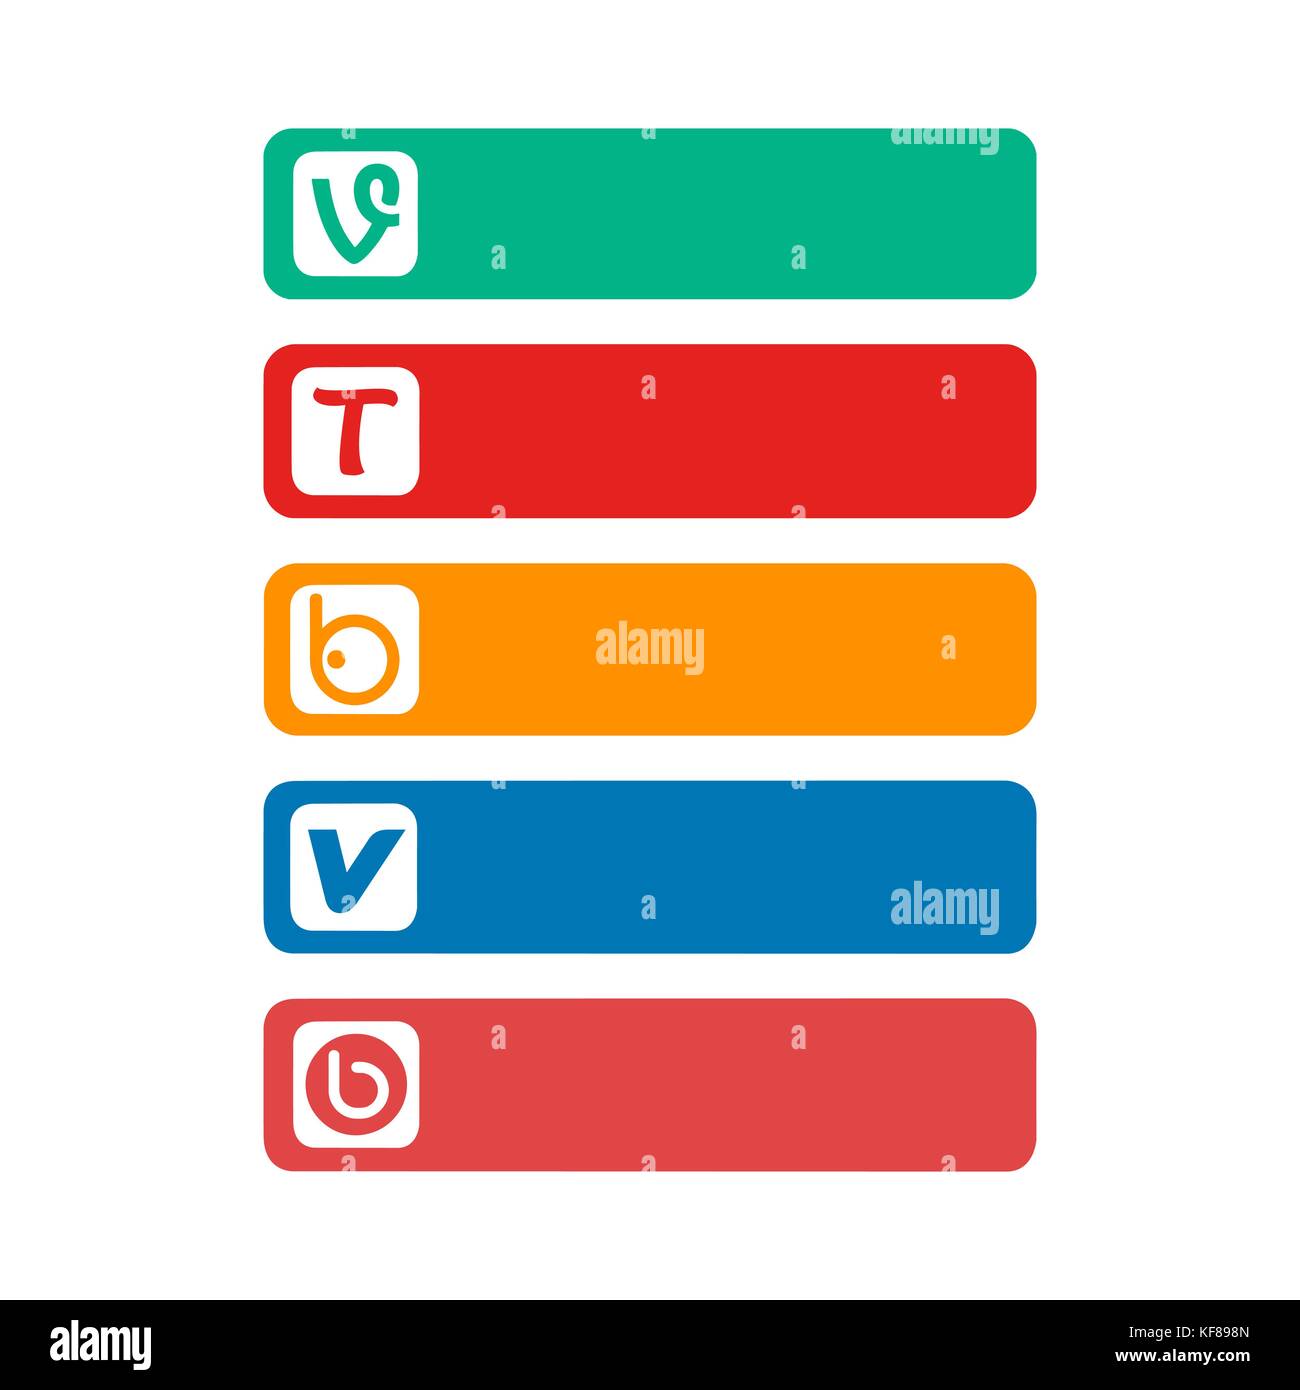 Collection of popular social media logos printed on paper: Vine, Tinder, Tango and others. Stock Vector